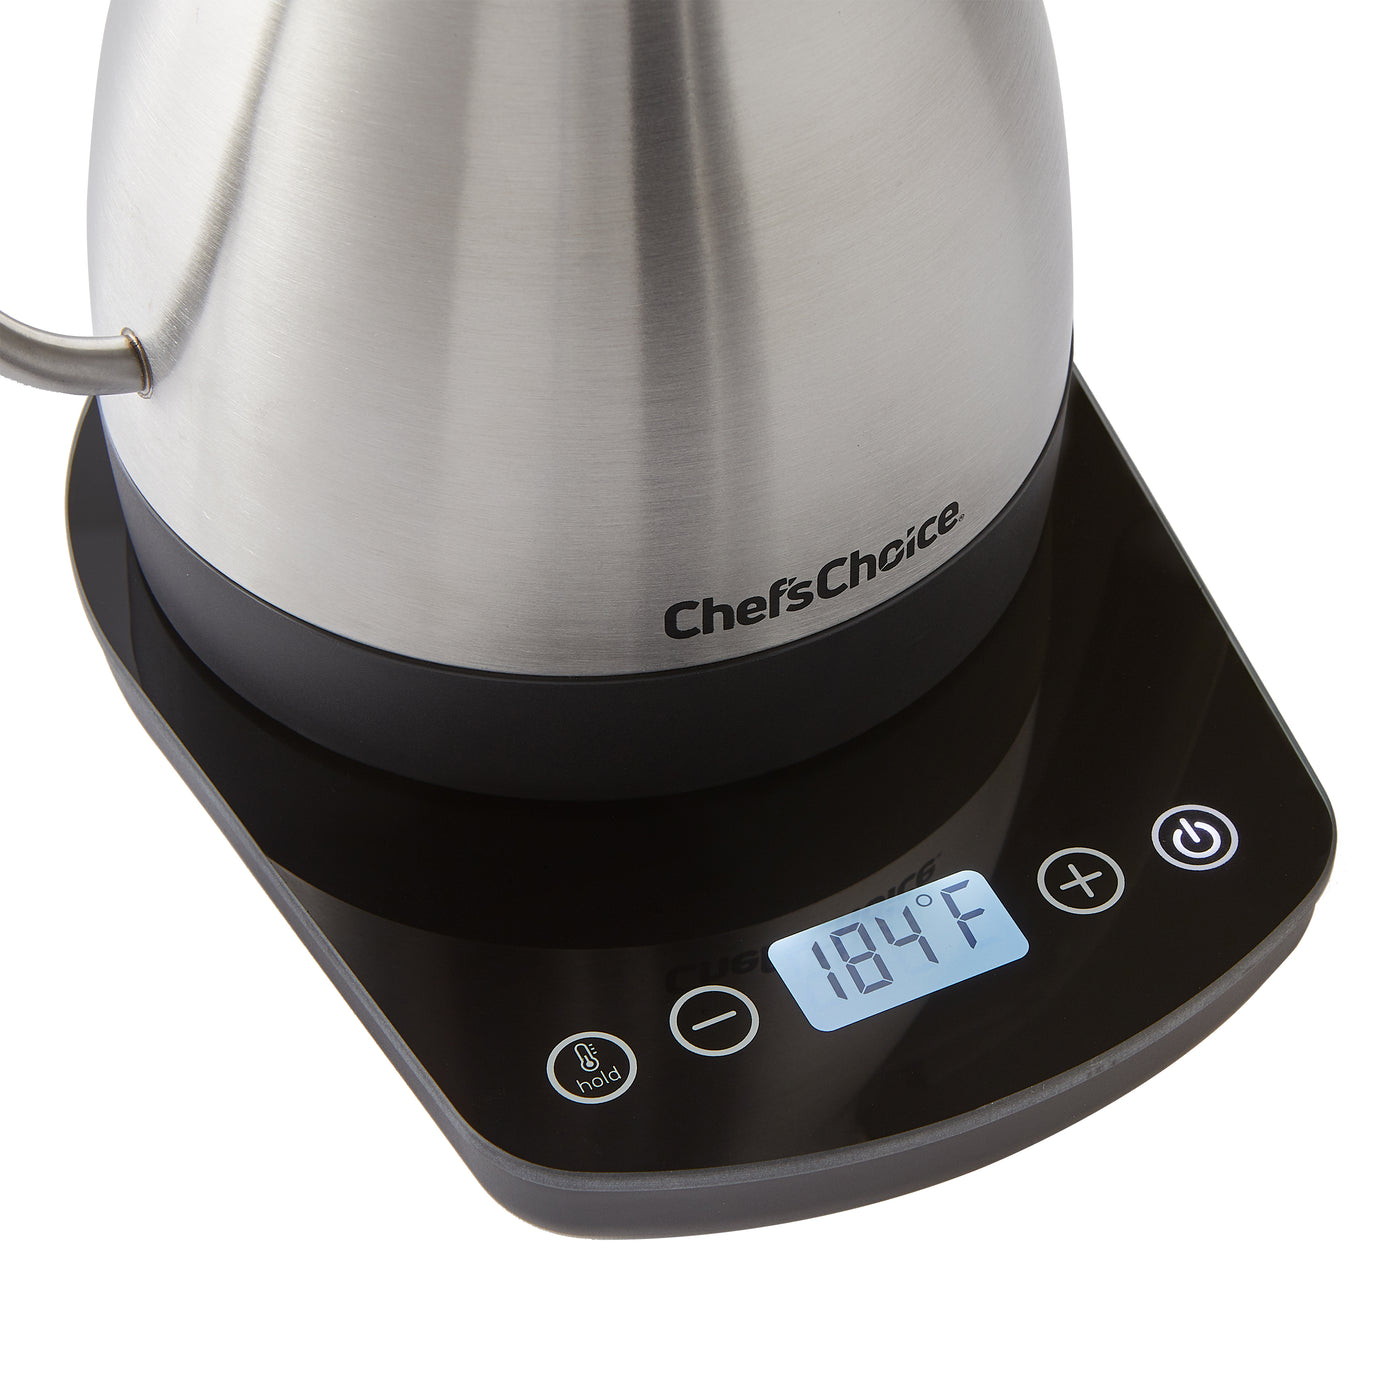 The Chef'sChoice Gooseneck Pour Over Electric Kettle boils water to the  exact degree faster than a microwave or stovetop. The unique gooseneck  spout allows for predictable accurate pouring when used for a